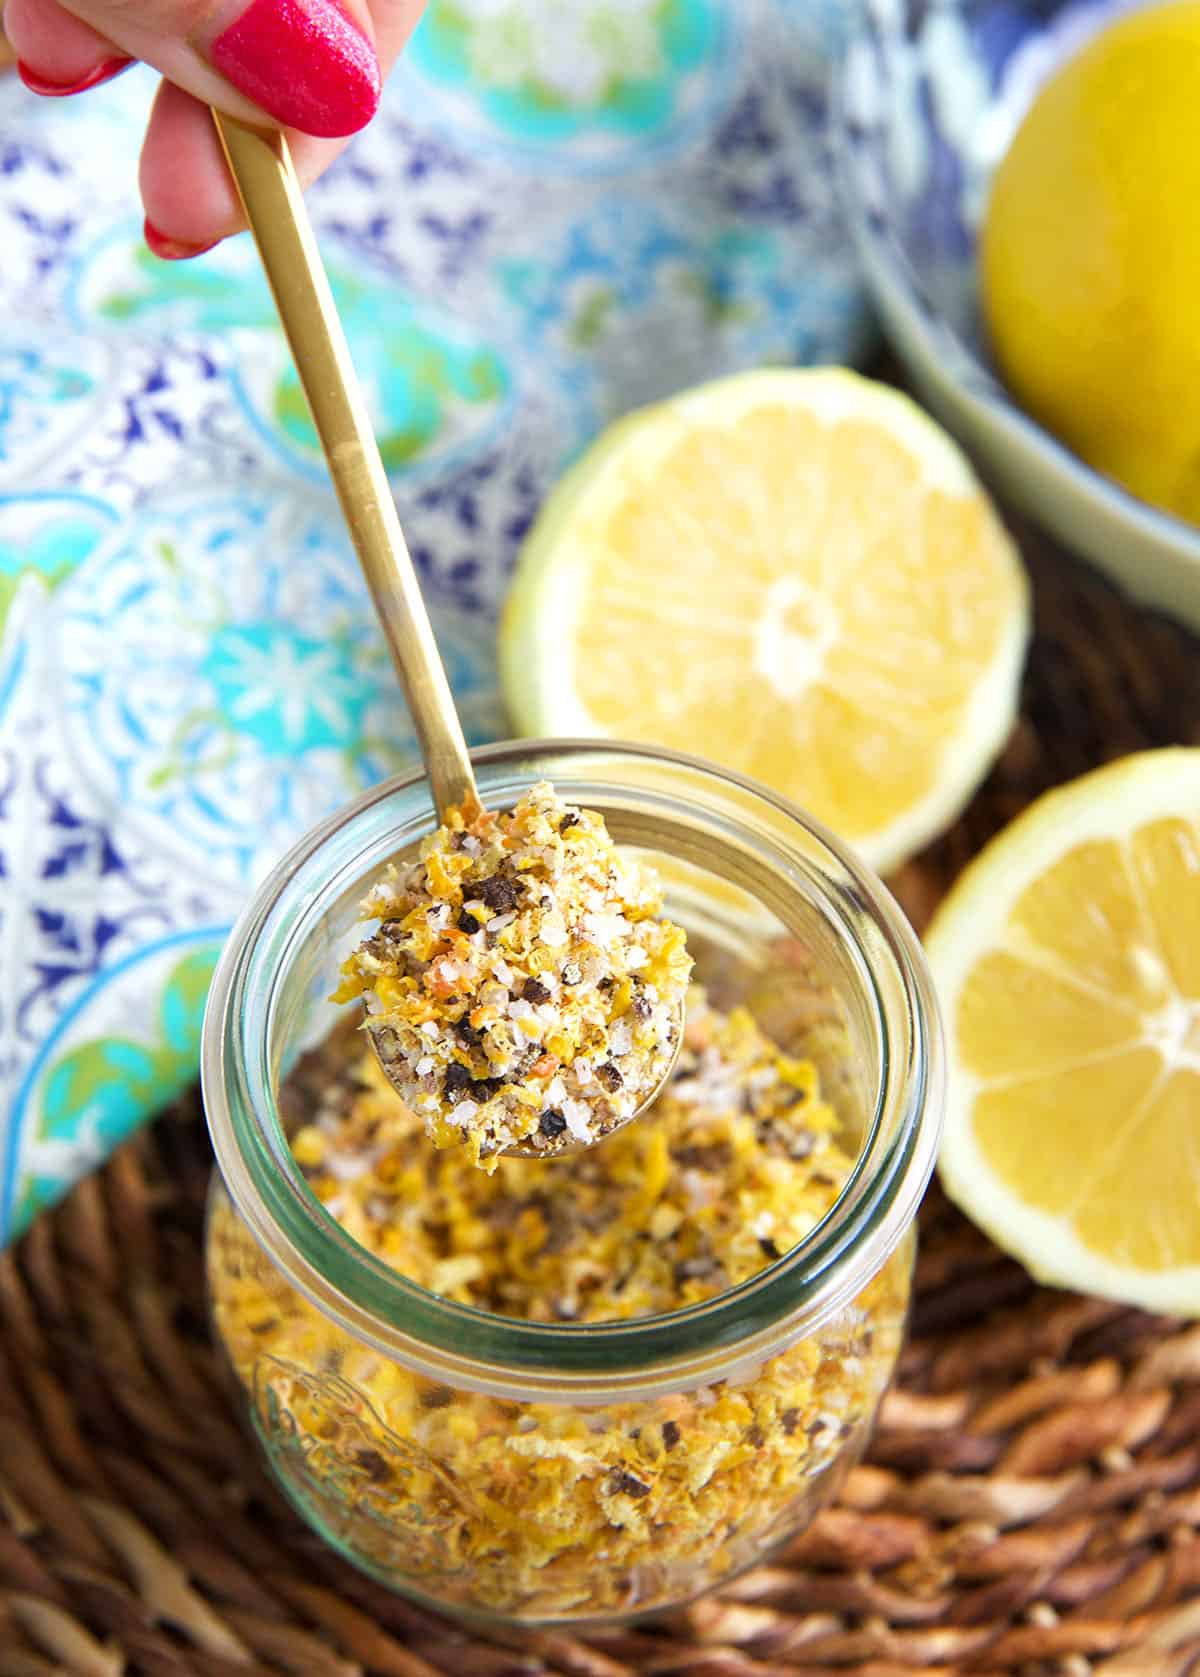 A small spoon is holding a portion of lemon pepper seasoning above a jar.